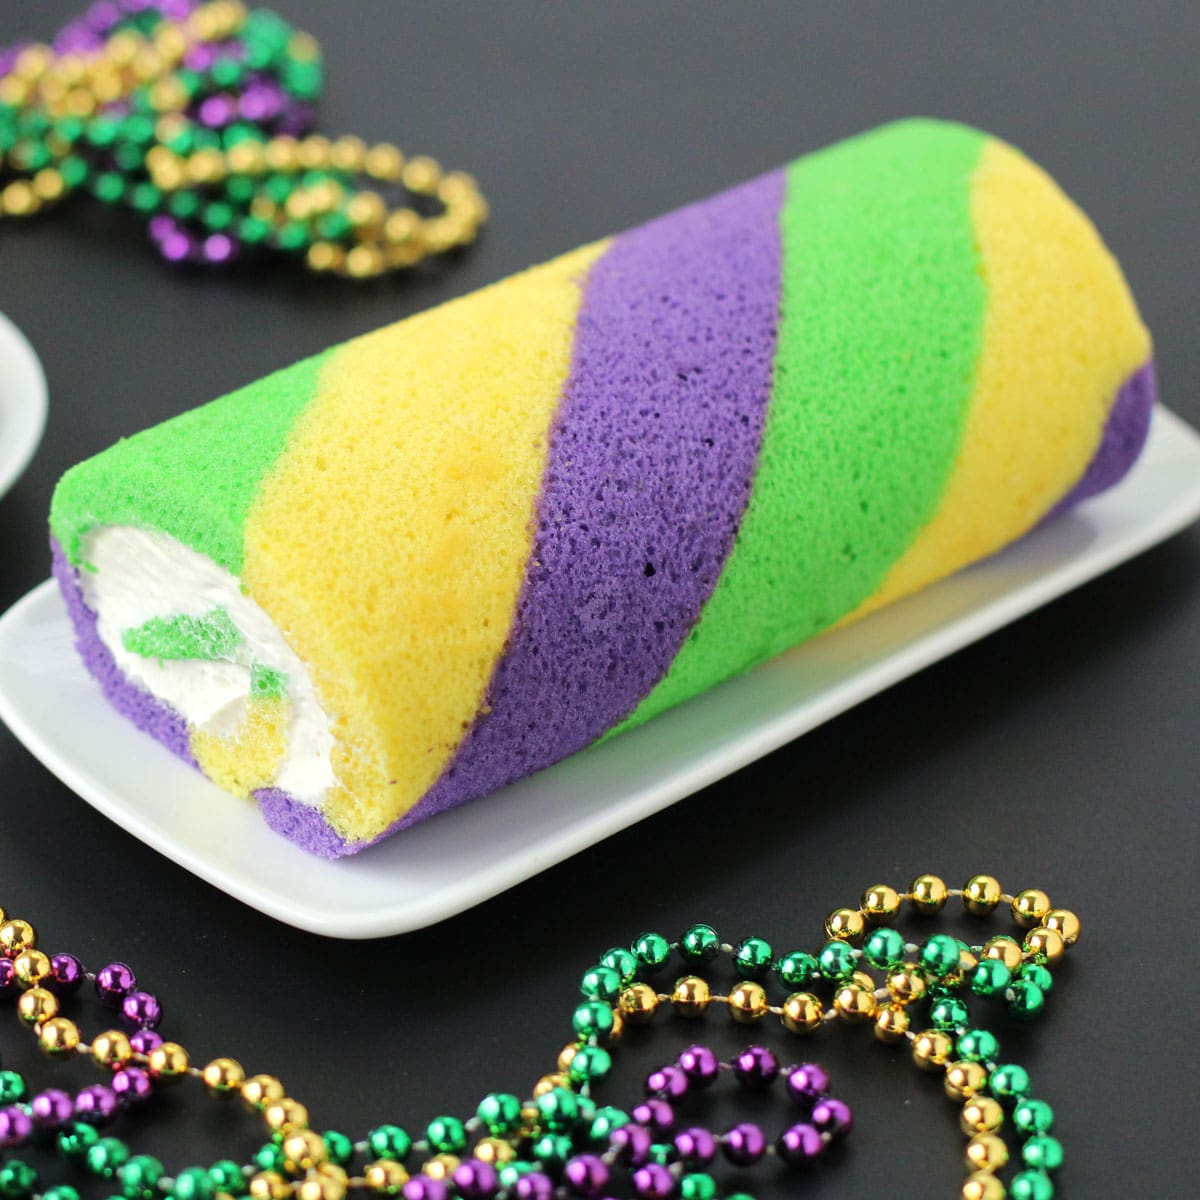 Mardi Gras Cake Roll with green, yellow, and purple stripes